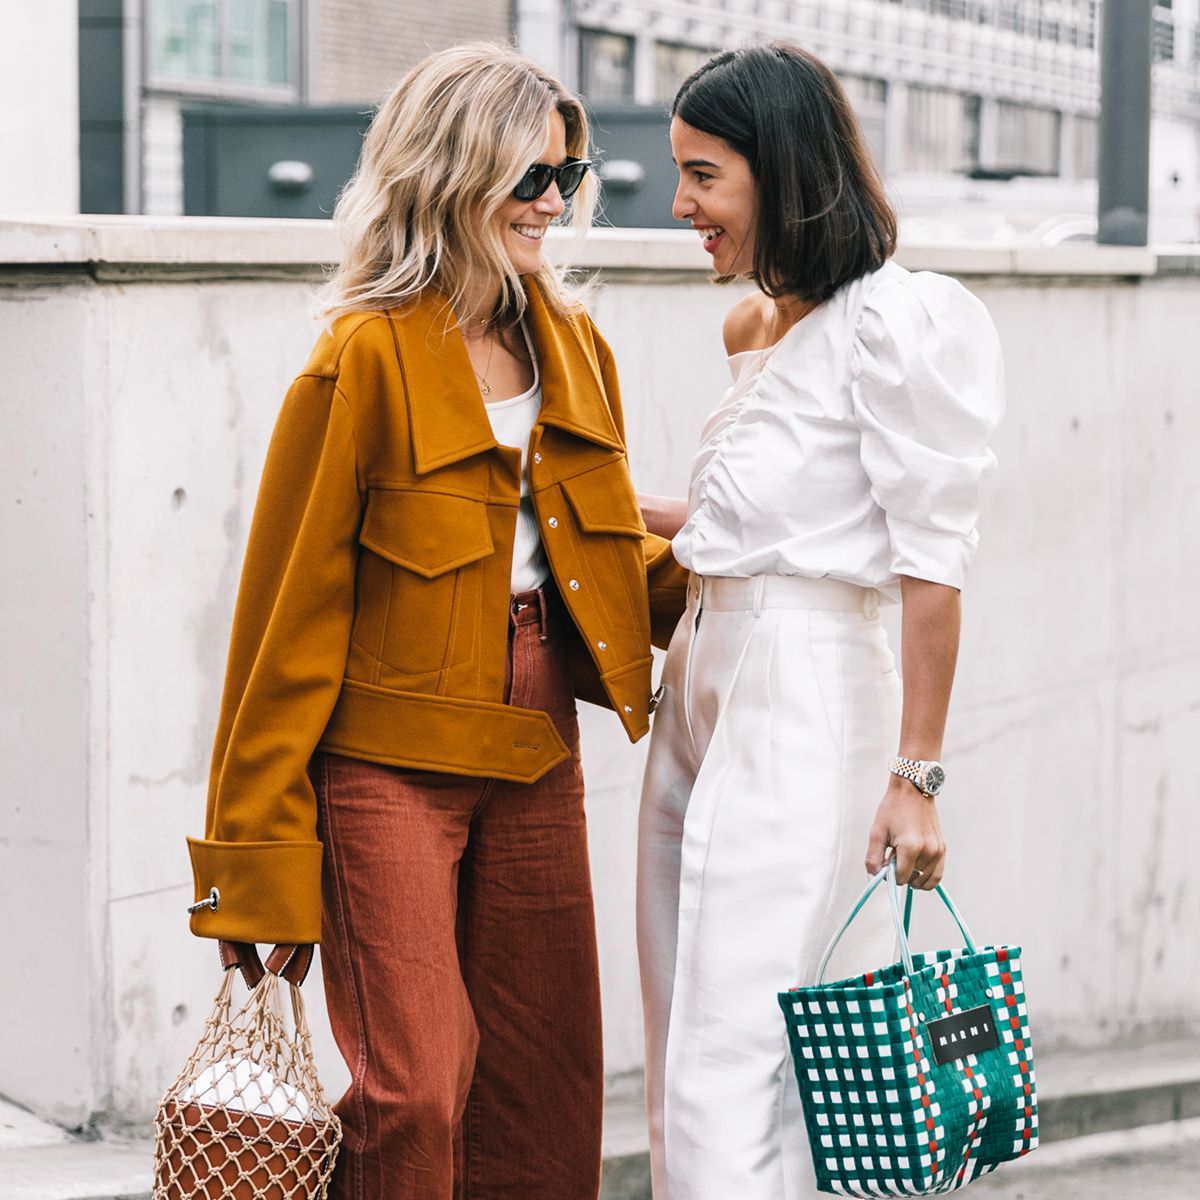 The Worst Fashion Mistakes According to Editors